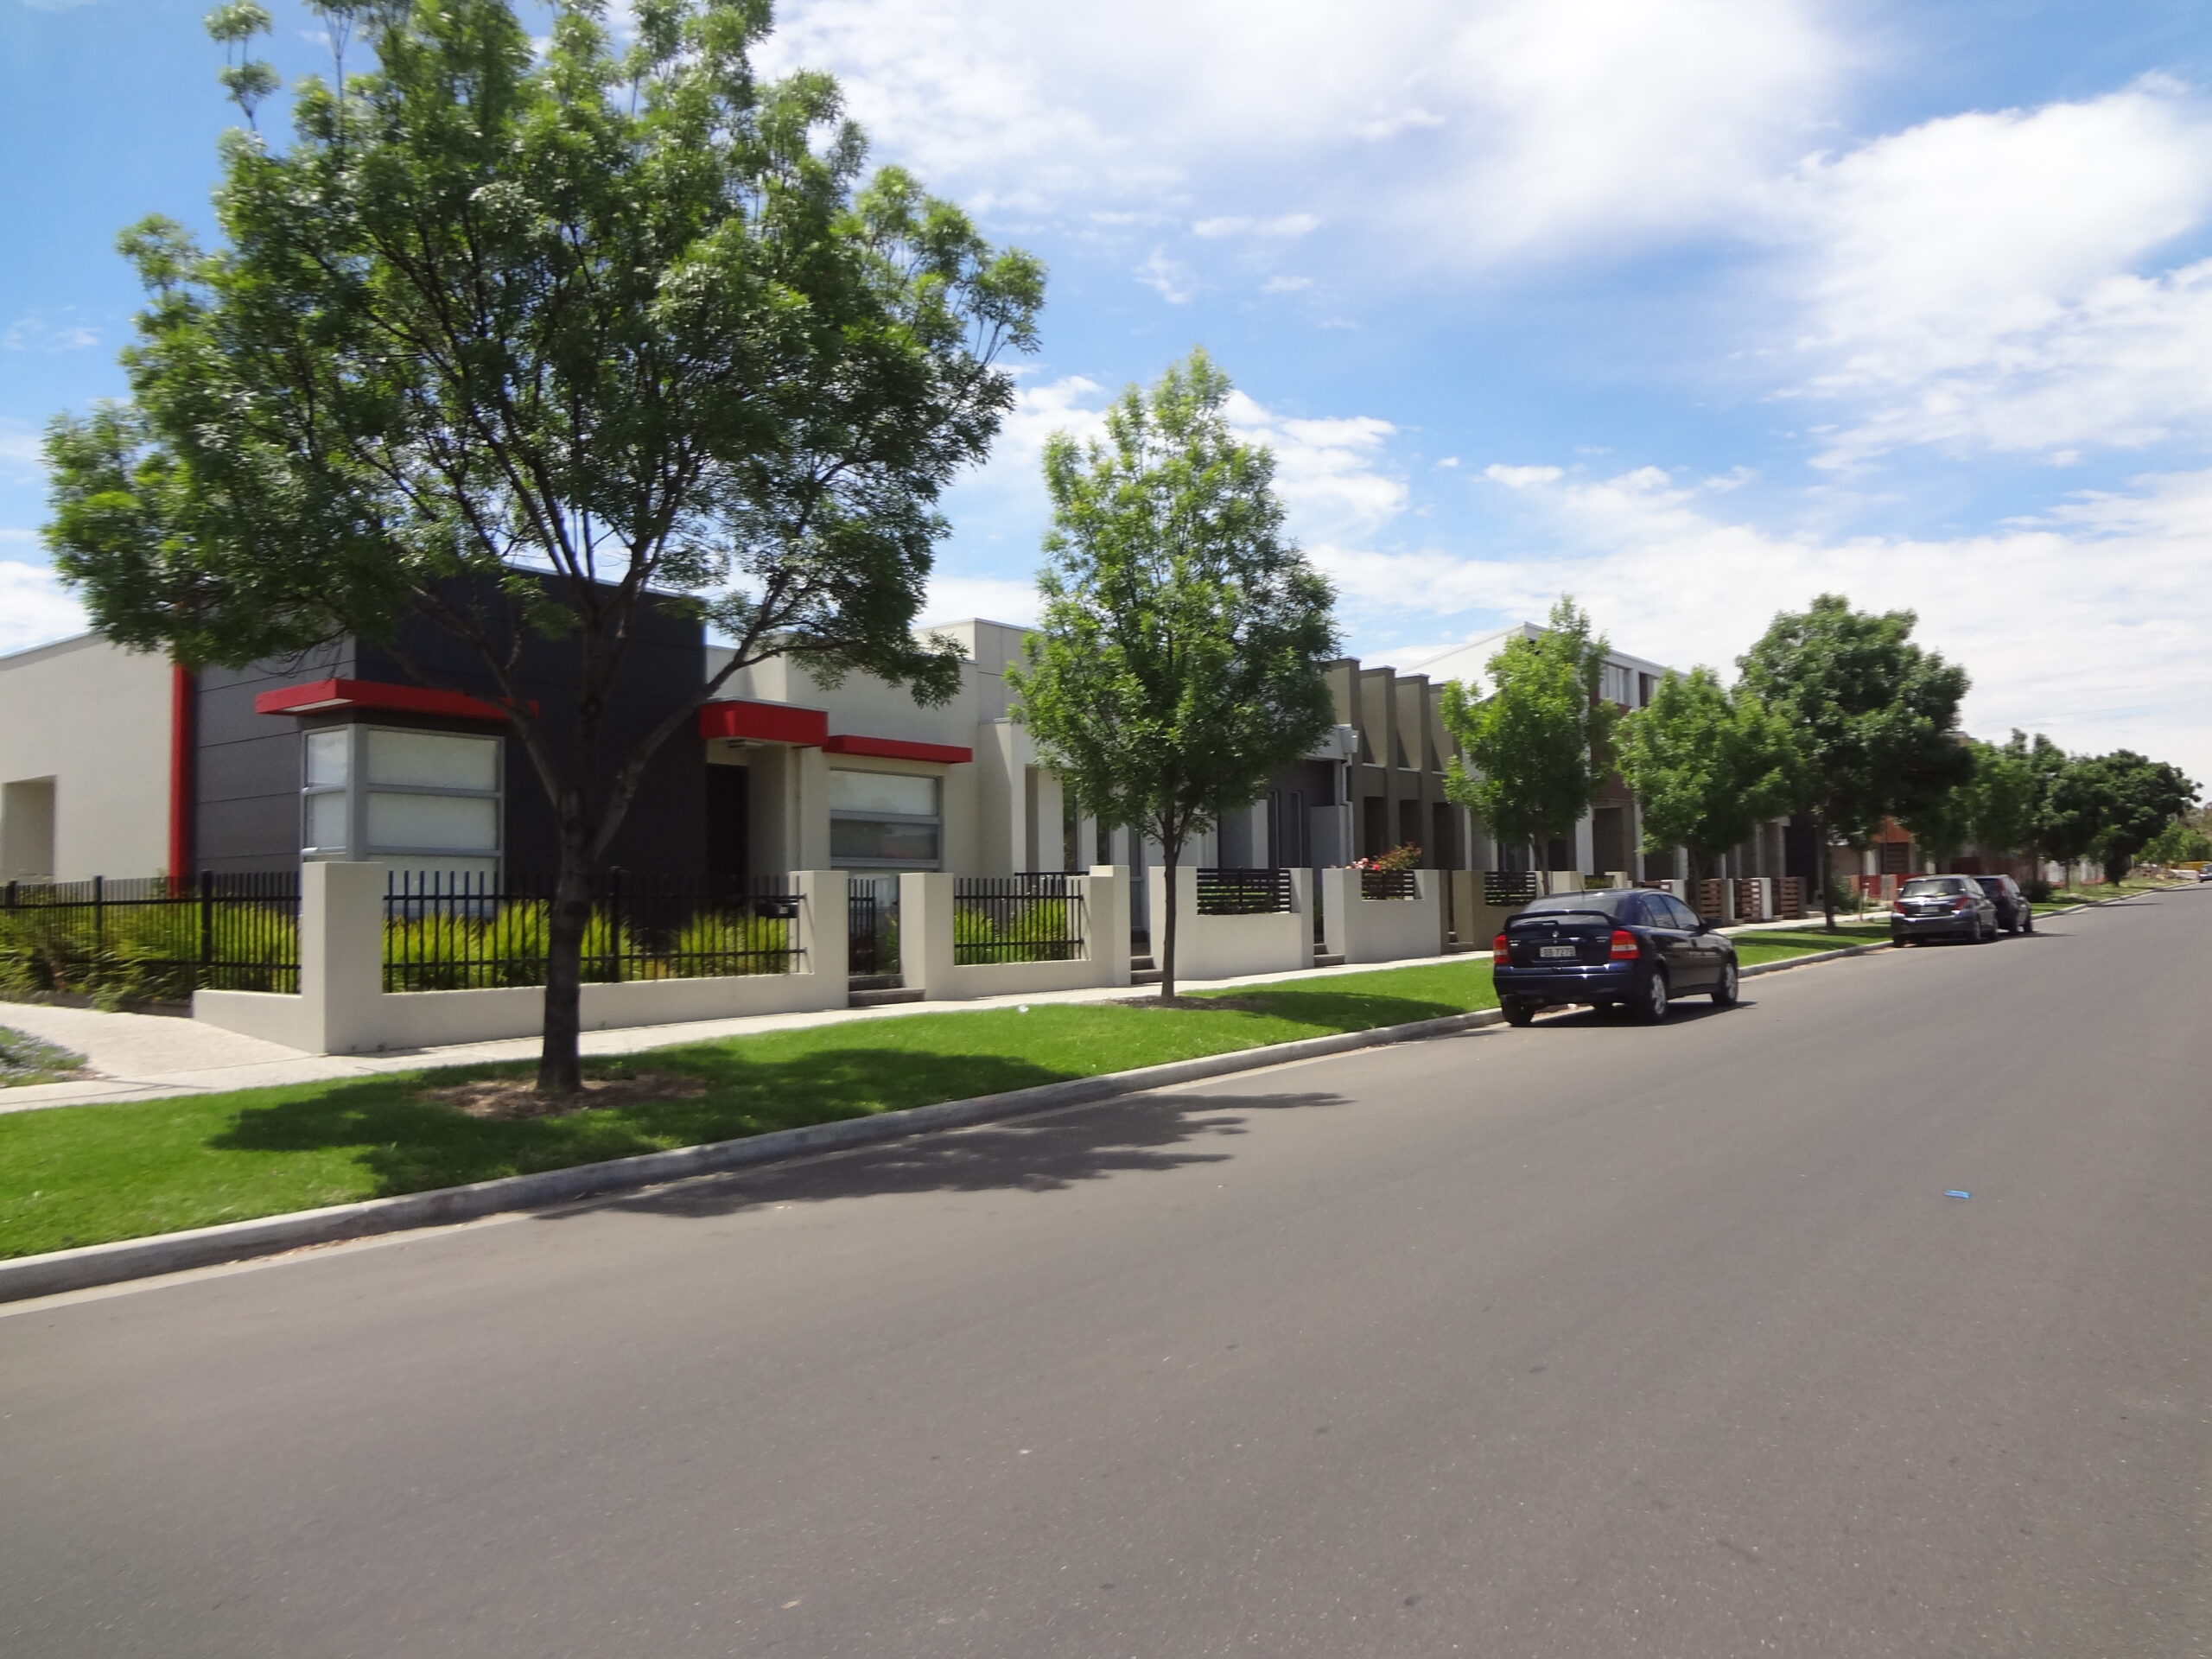 Redward Avenue,
Lightsview - stormwater harvesting and re-use